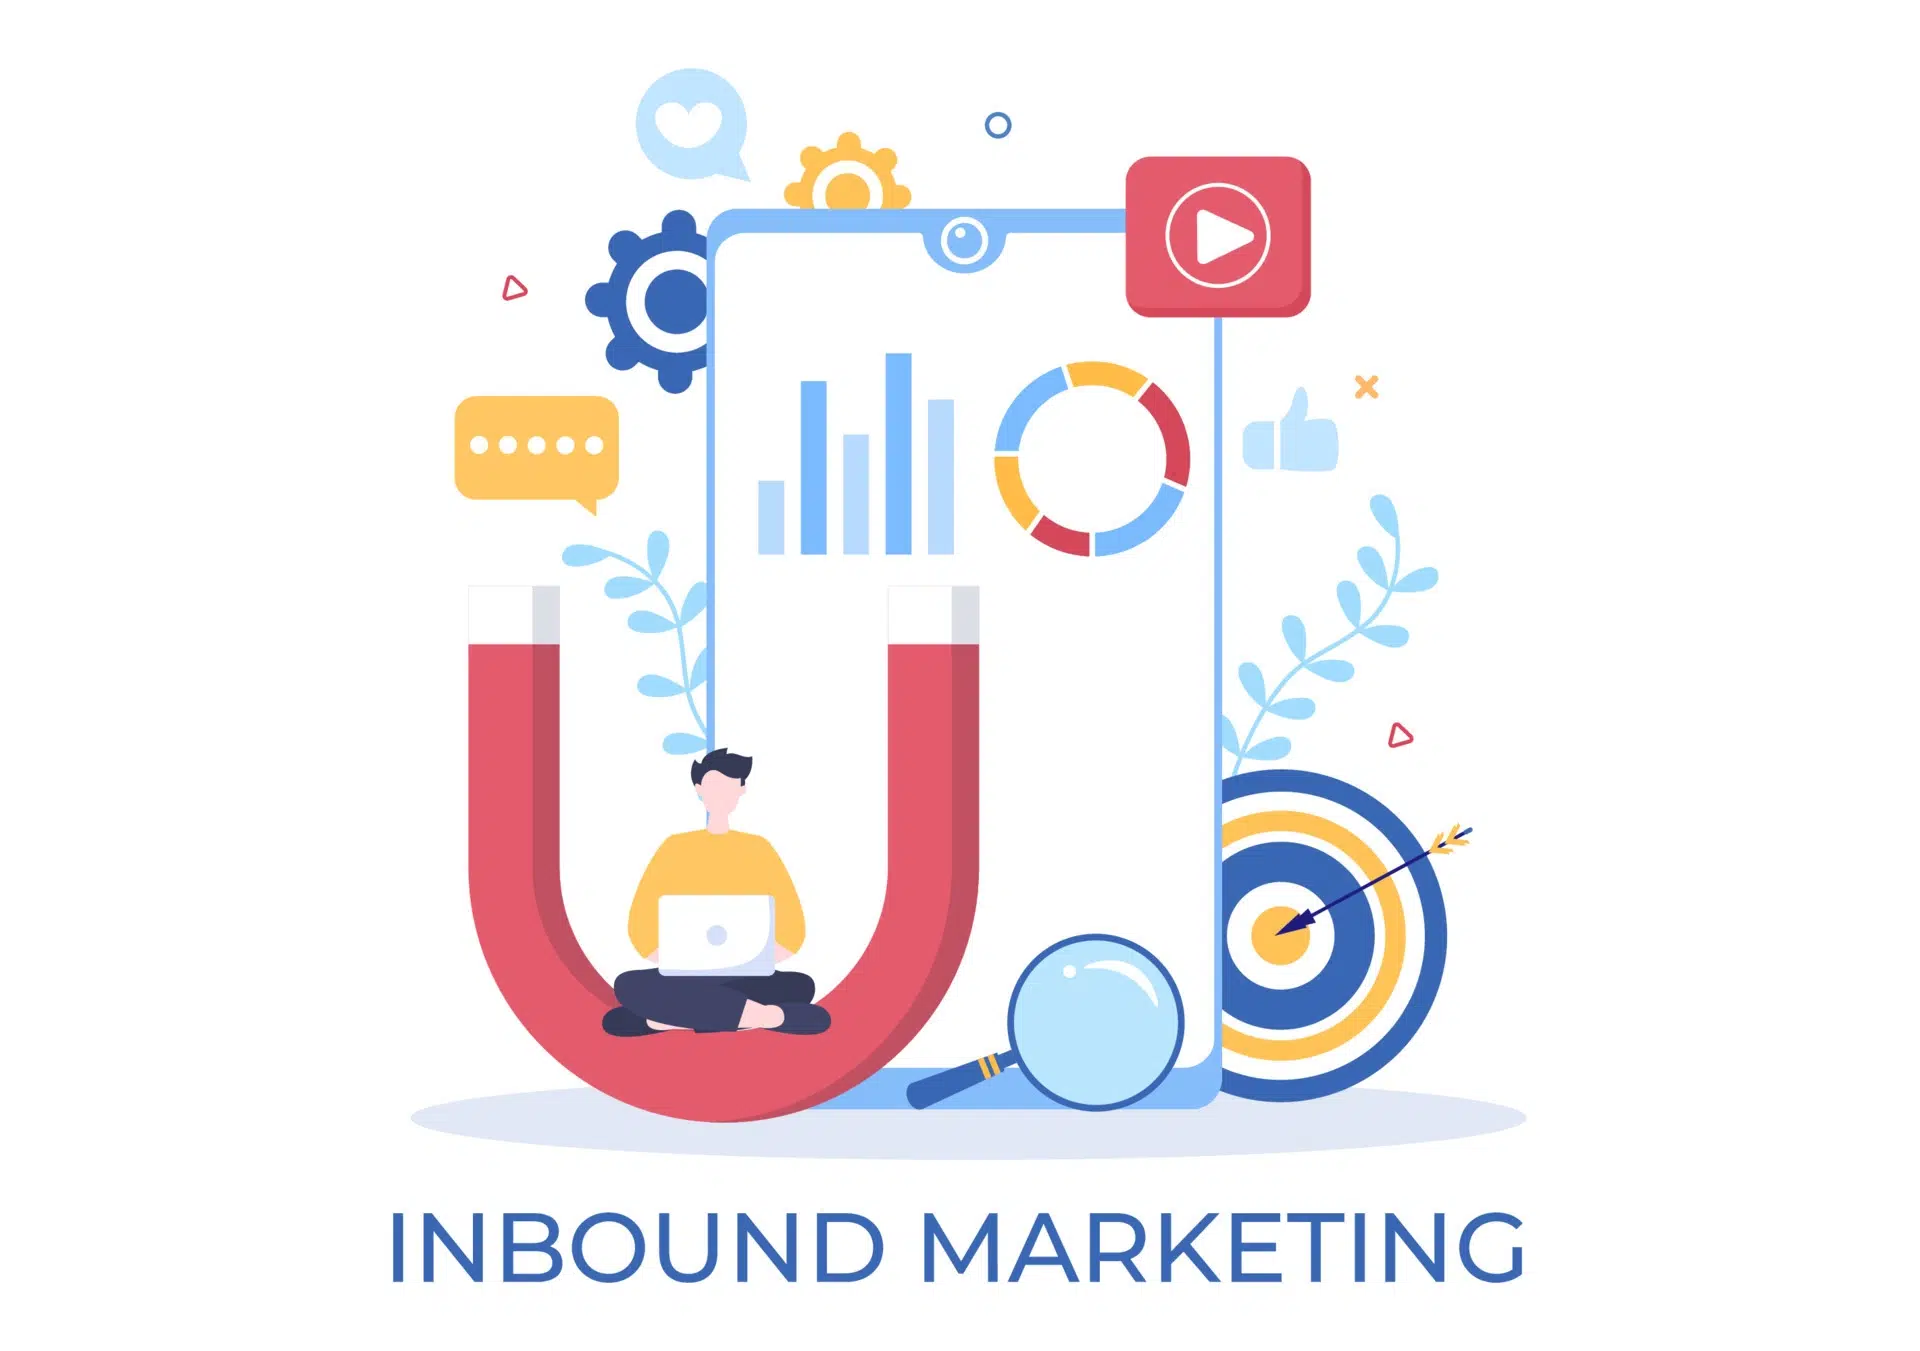 inbound marketing business illustration with magnet design to attract customers offline or online for web or poster vector